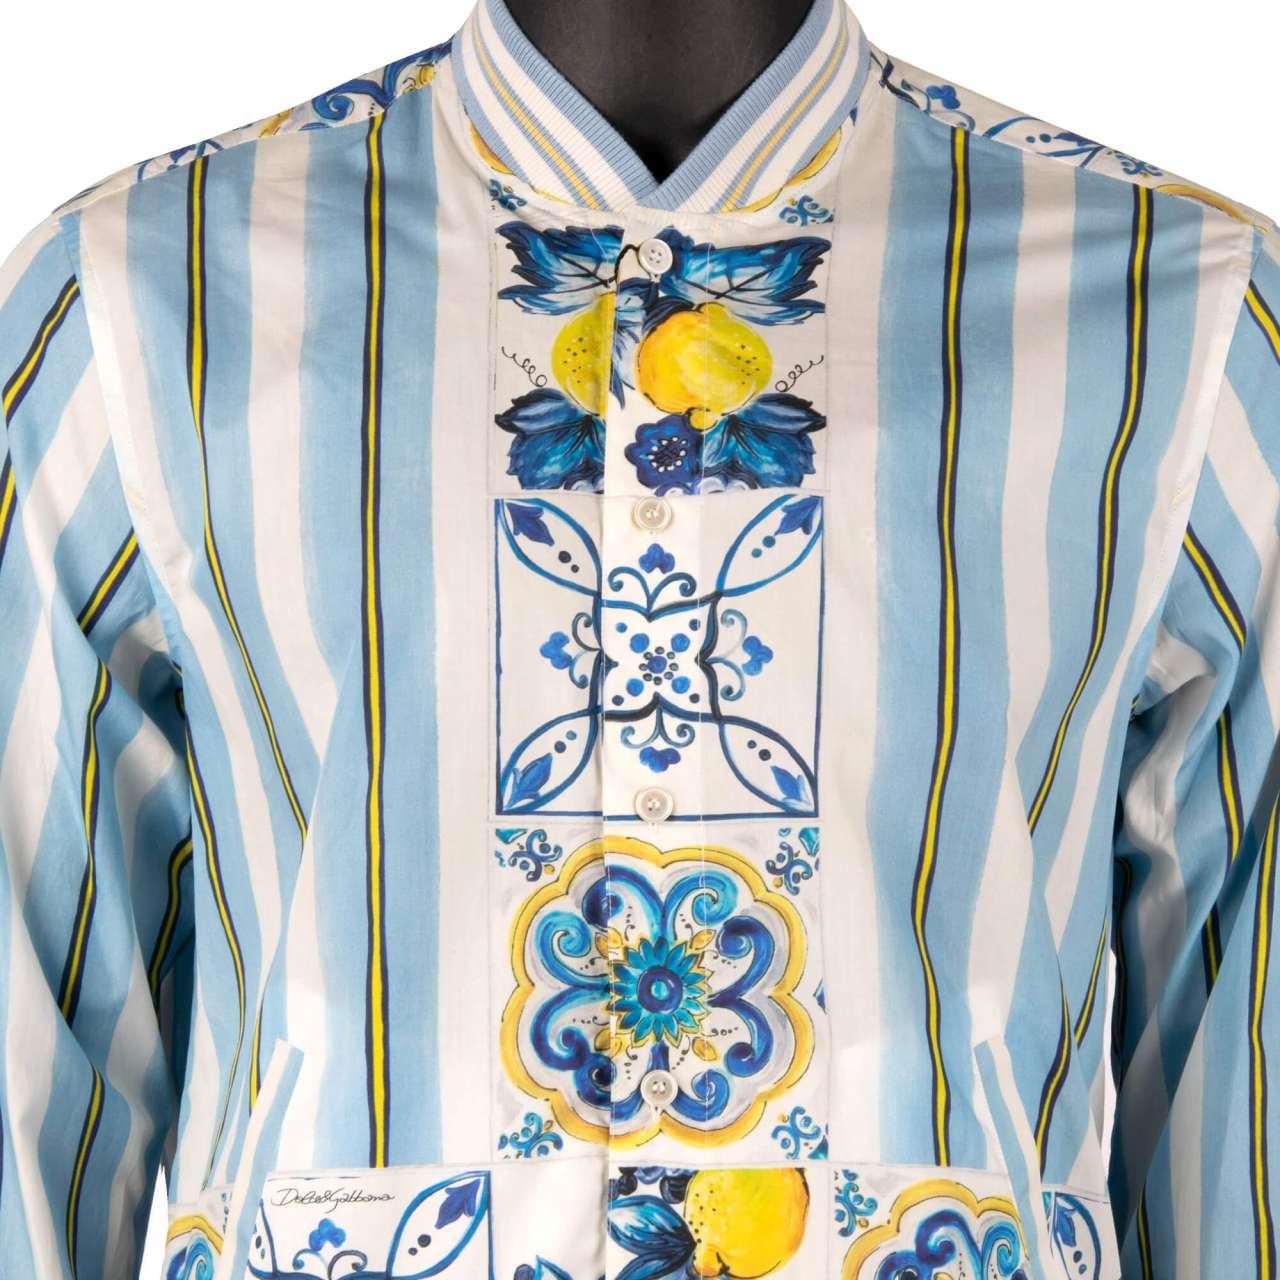 D&G - Majolica Striped Print Cotton Shirt Jacket Blue White Yellow 40 M In Excellent Condition For Sale In Erkrath, DE